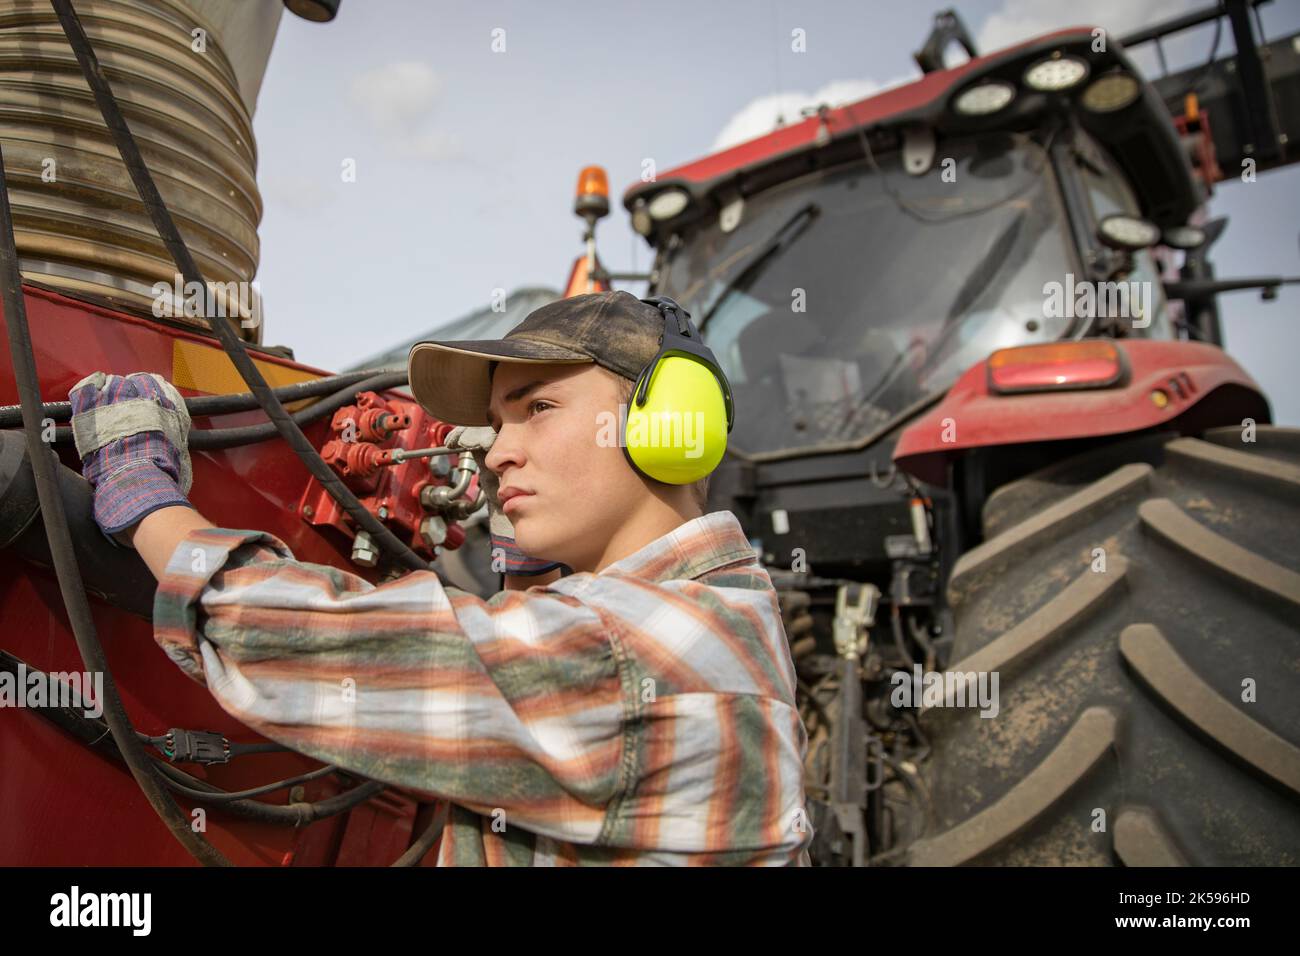 Teenage boy farmer with ear protectors standing at tractor, operating machinery Stock Photo